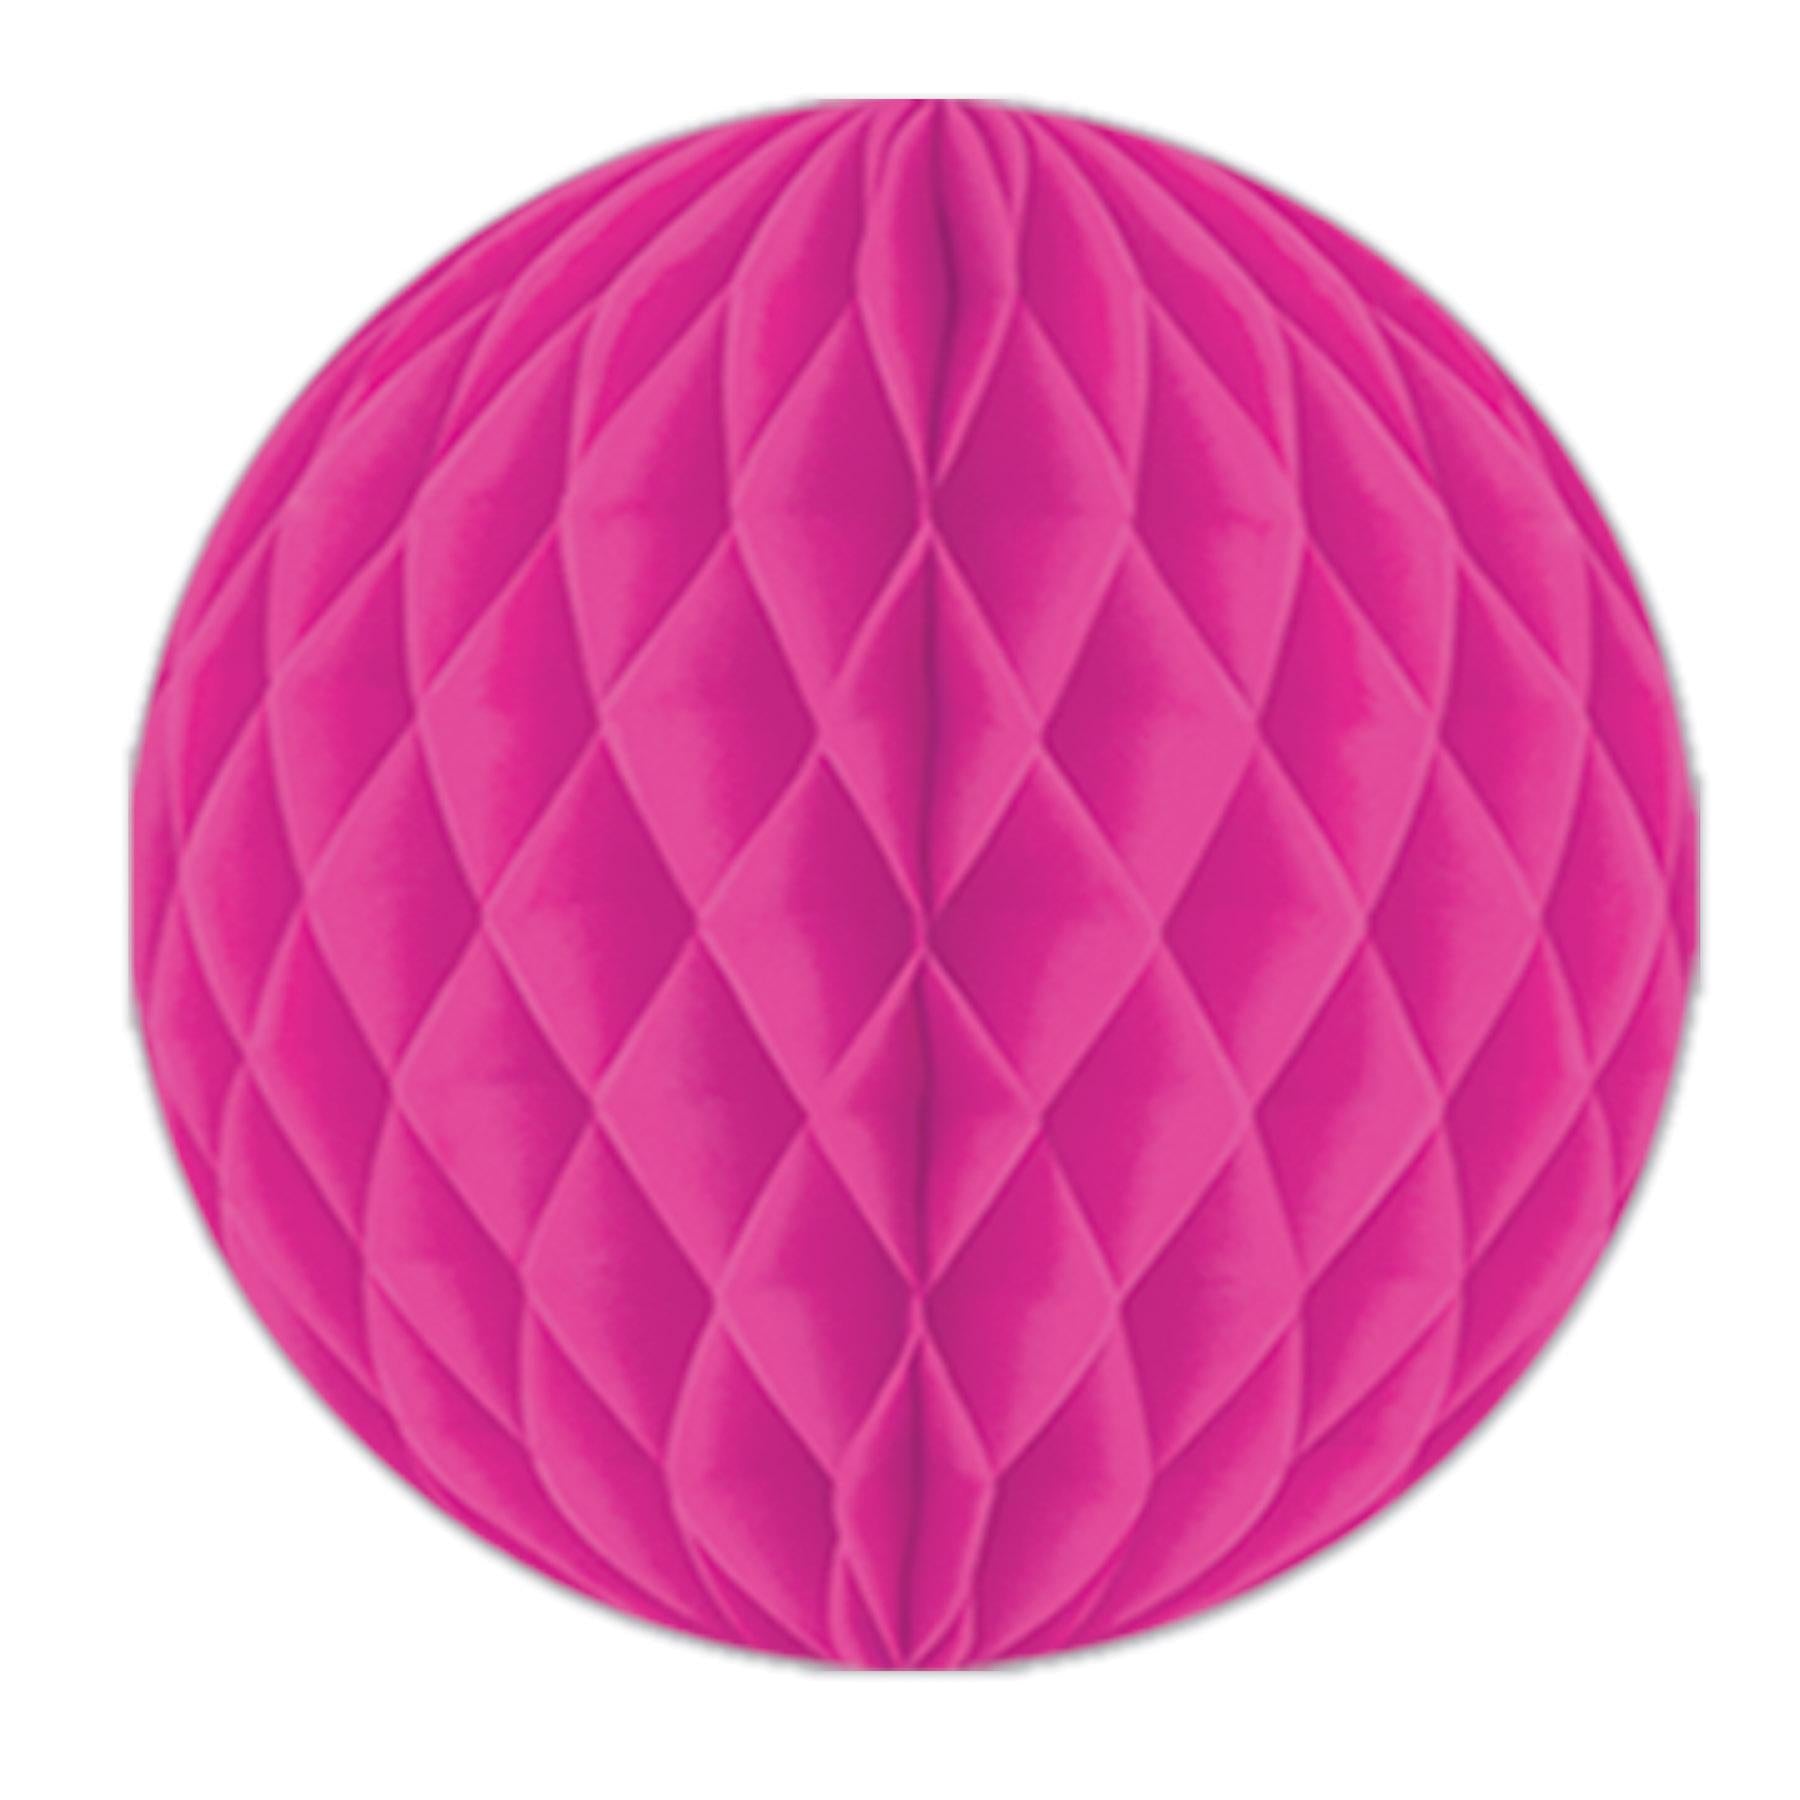 Beistle Party Tissue Ball - cerise